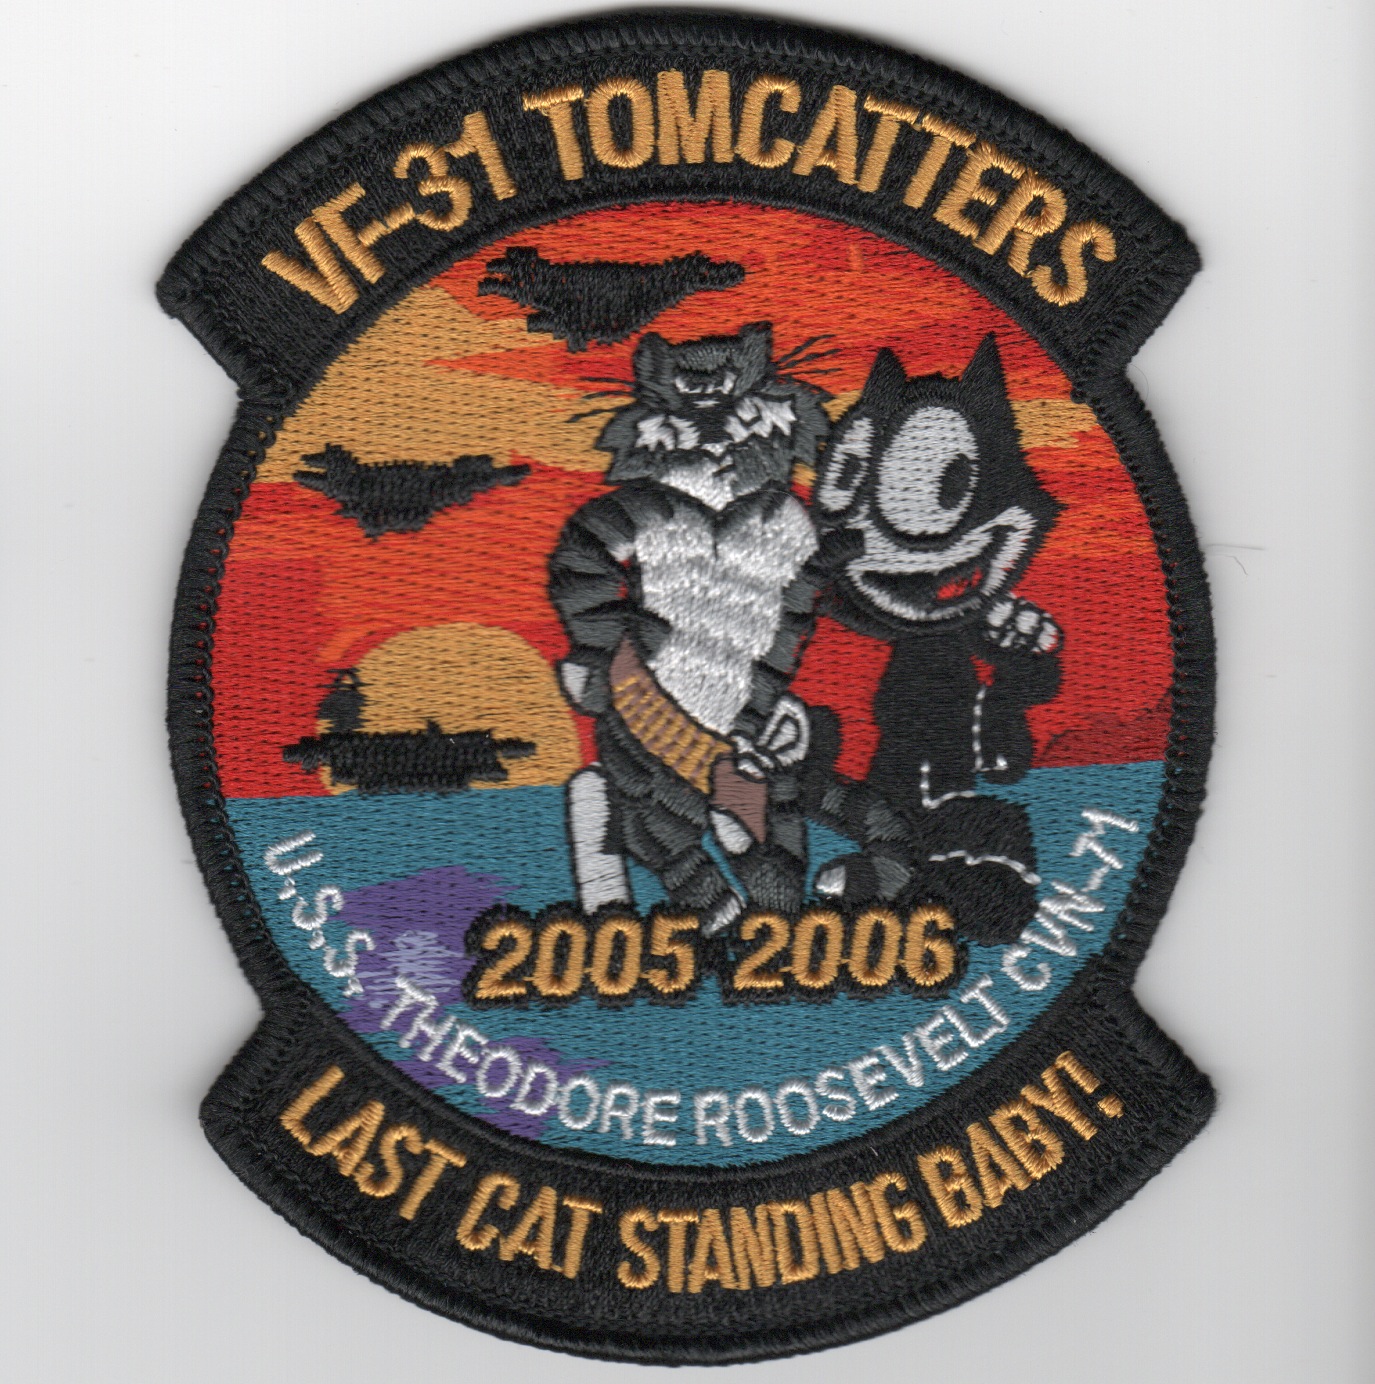 VF-31 'Last Cat Standing' Cruise Patch